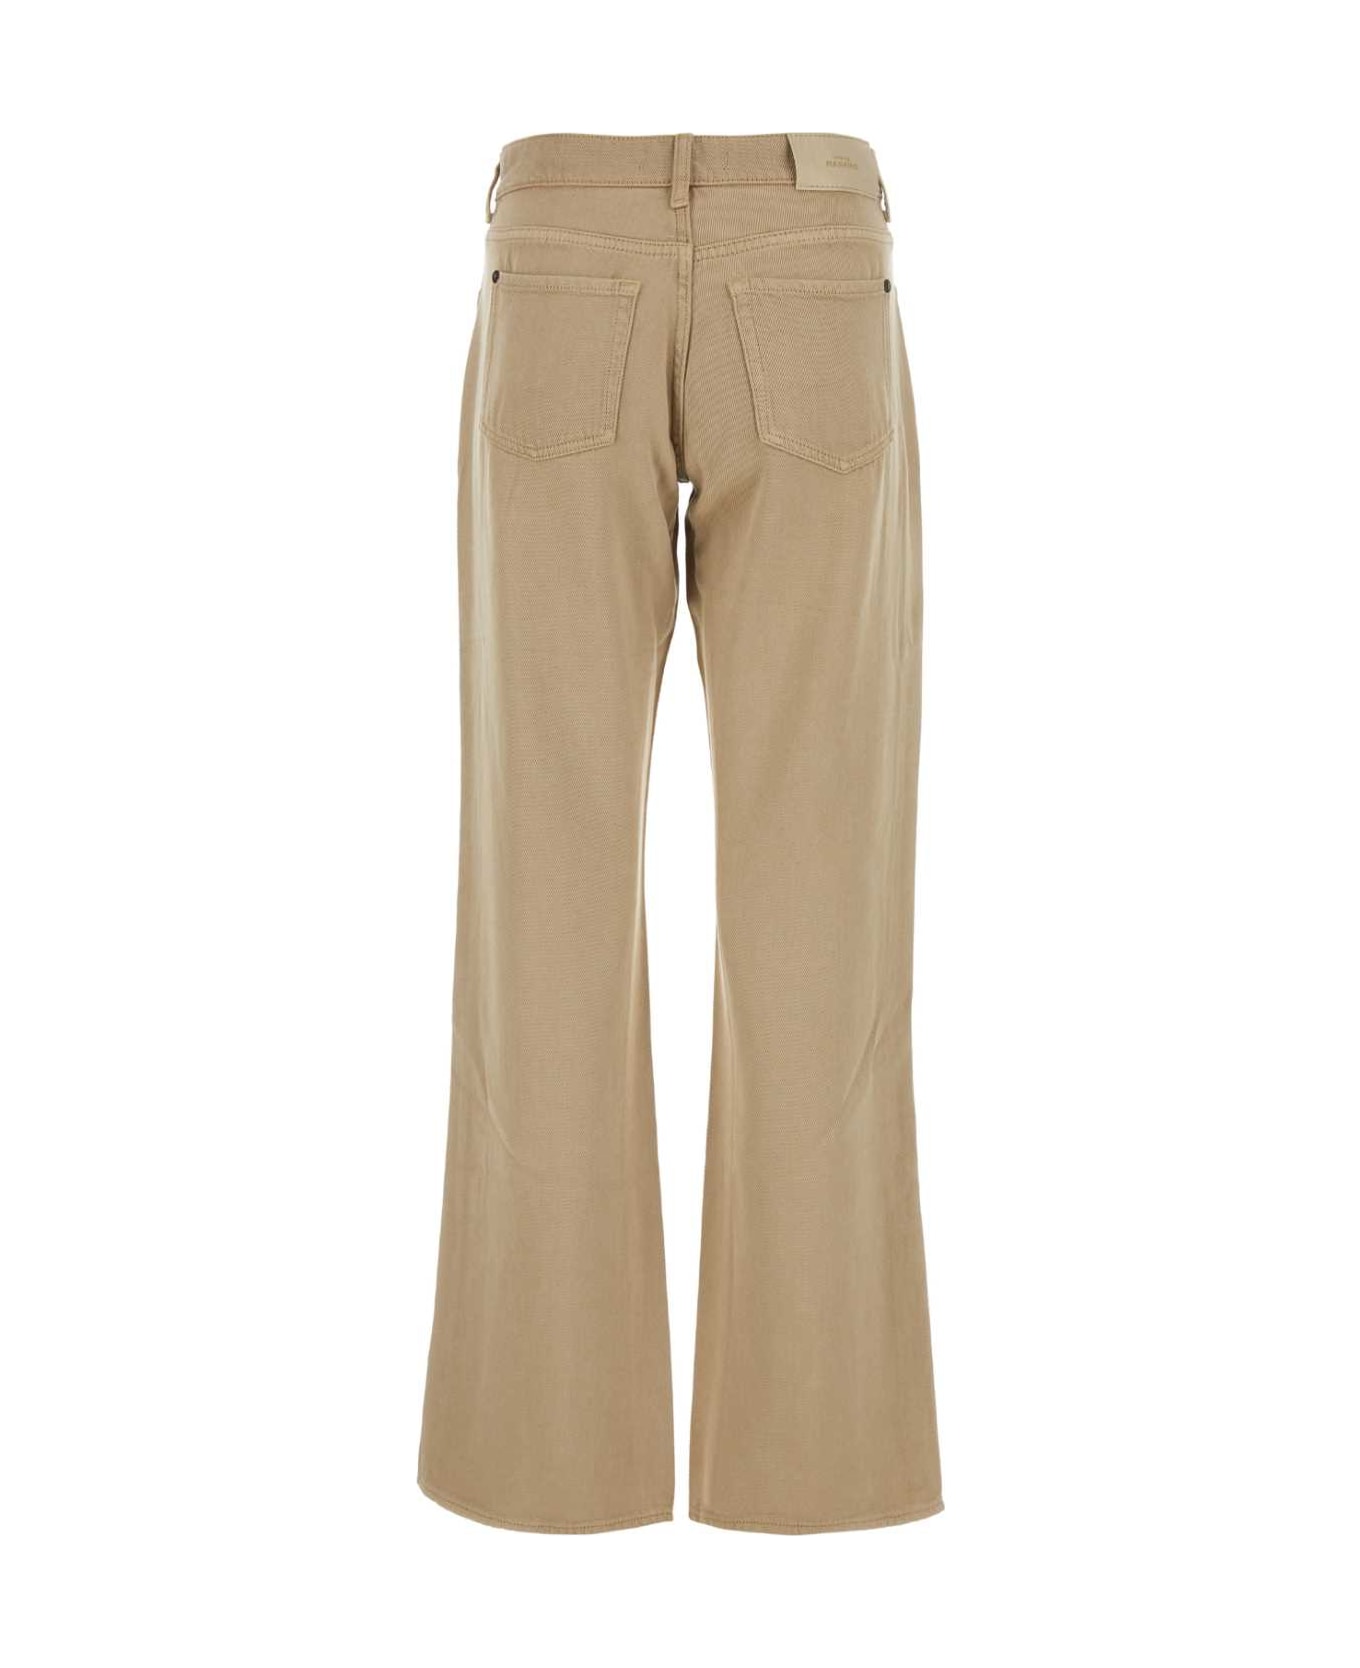 7 For All Mankind Camel Tencel Tess Pant - BEIGE